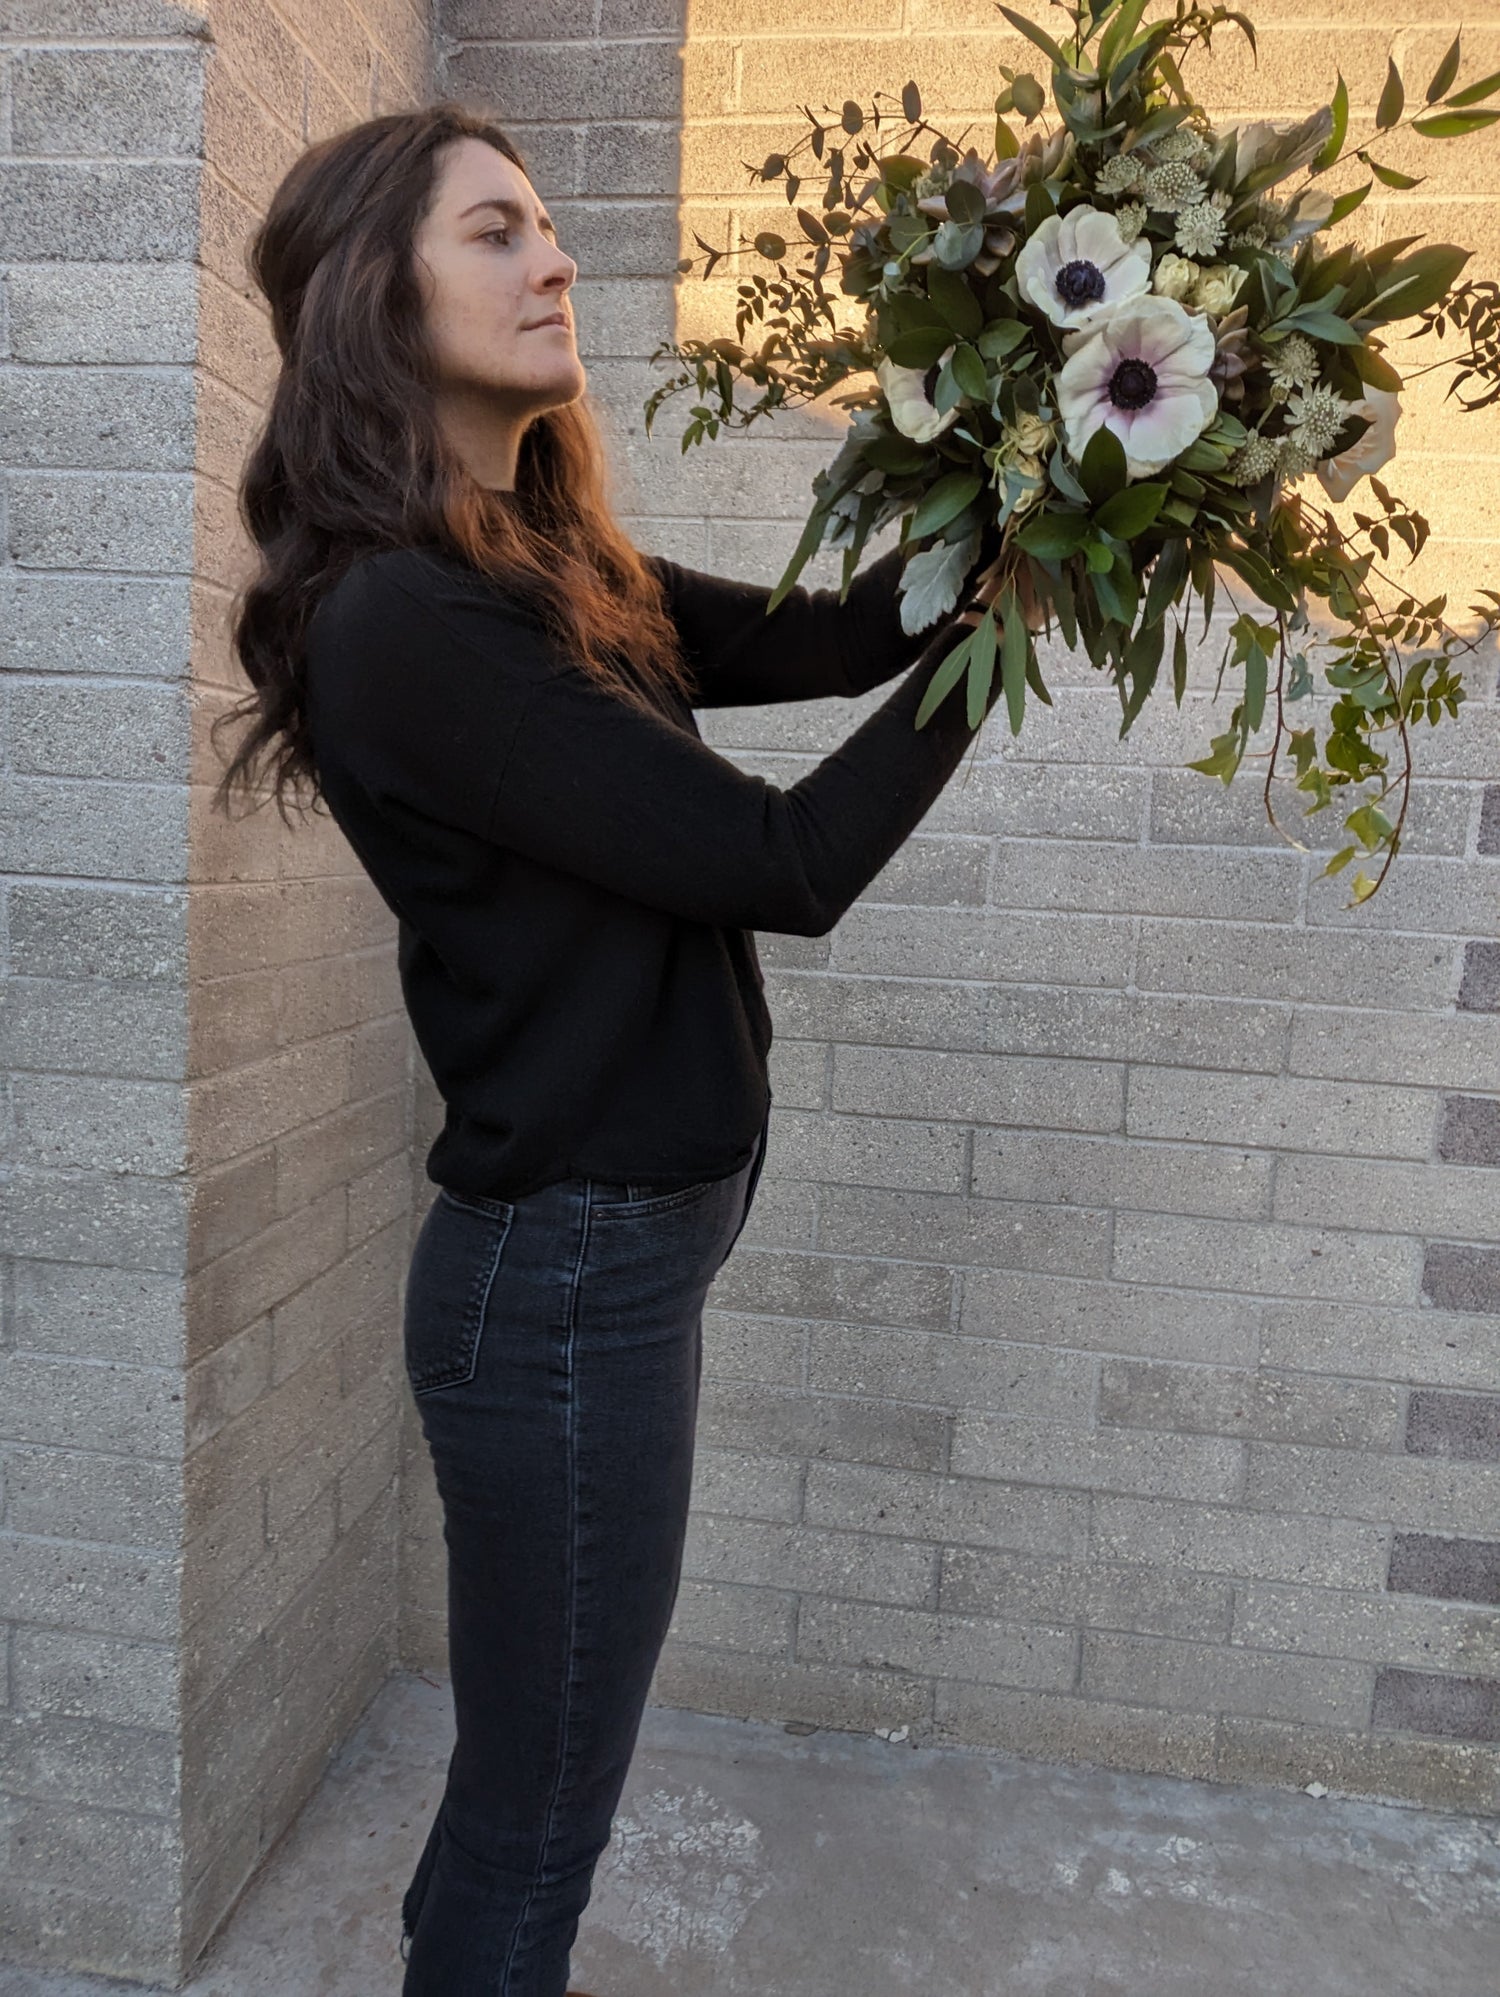 A florist examines her bouquet